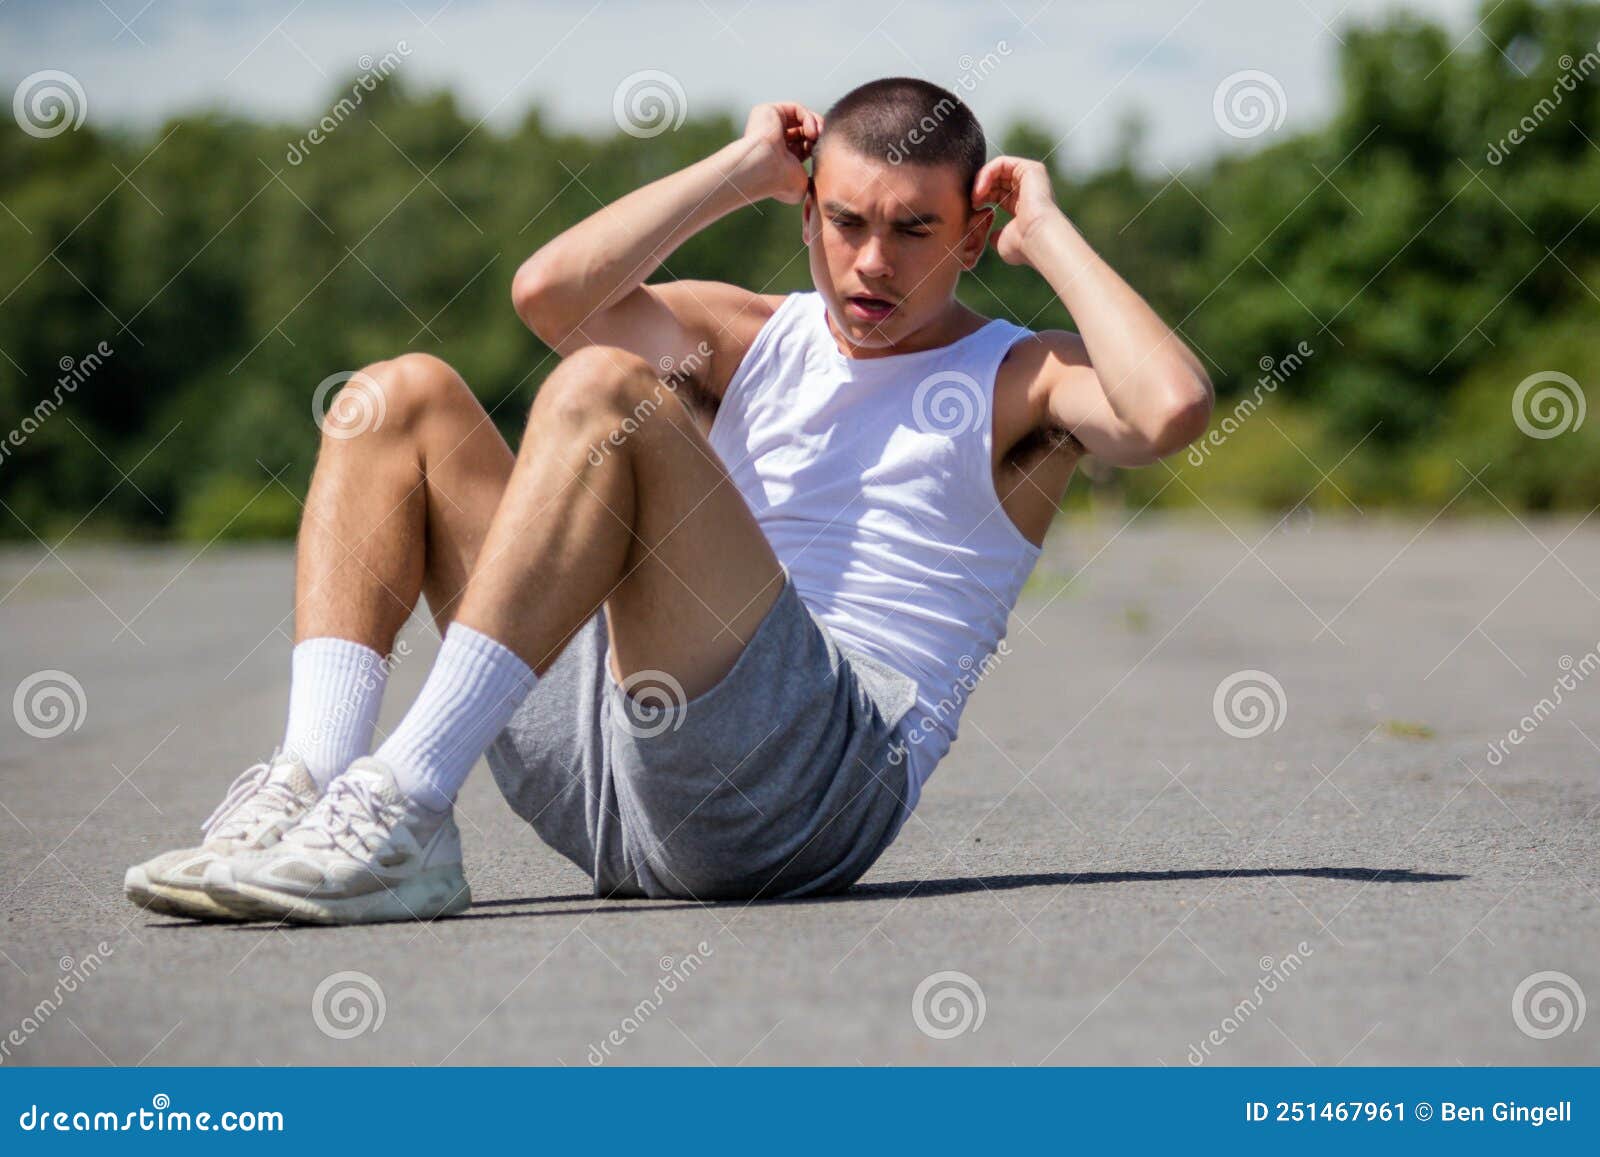 A 19 Year Old Teenage Boy Doing Situps in a Public Park Stock Image ...